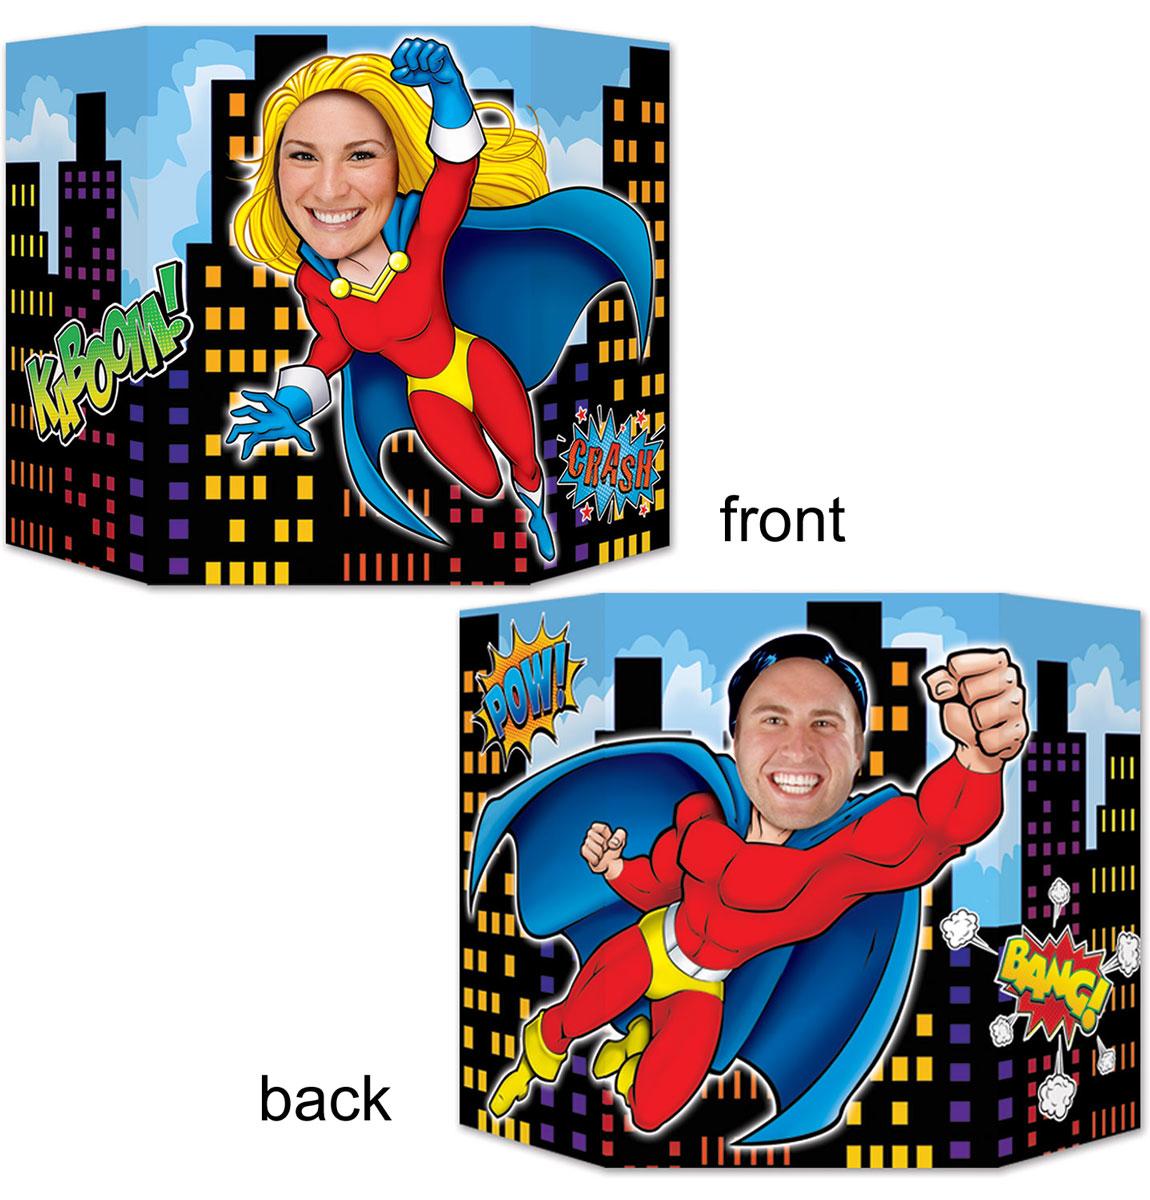 Two-sided Superhero Photo Prop for classic photobooth or selfies by Beistle 59886 available in the UK here at Karnival Costumes online party shop